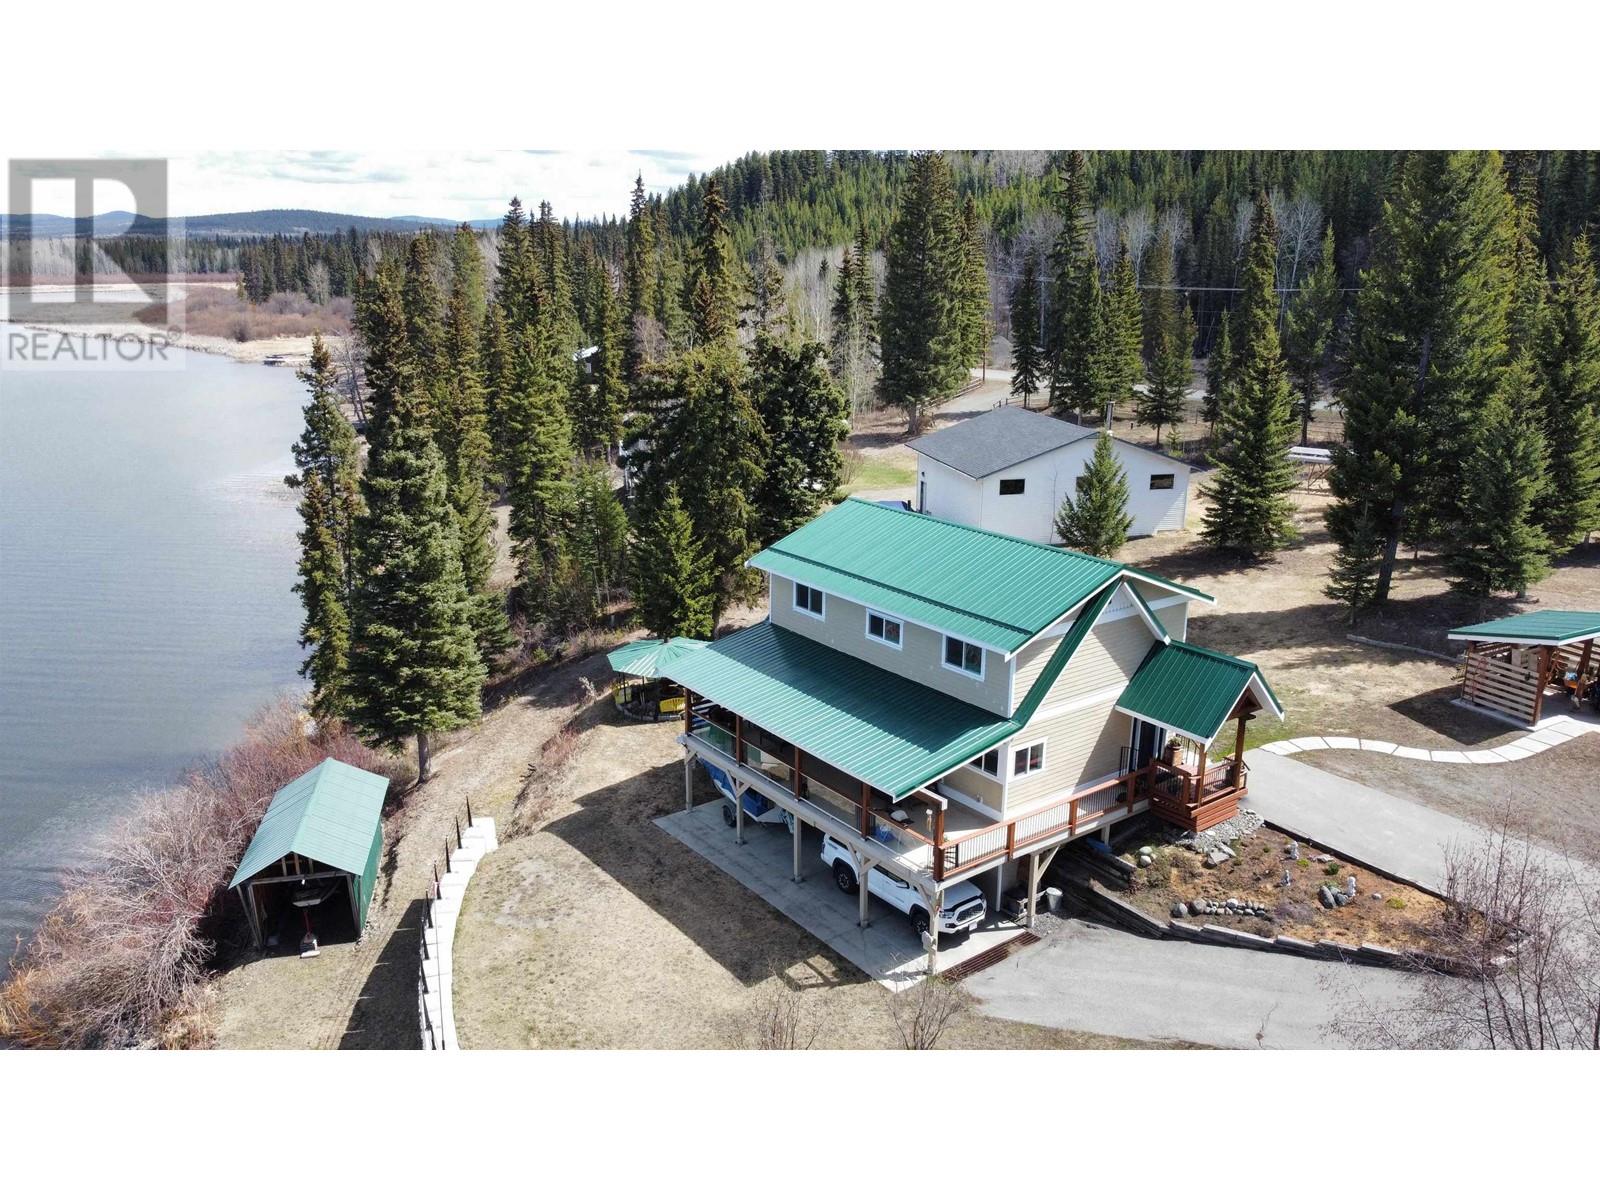 6627 MCNOLTY ROAD, 100 mile house, British Columbia